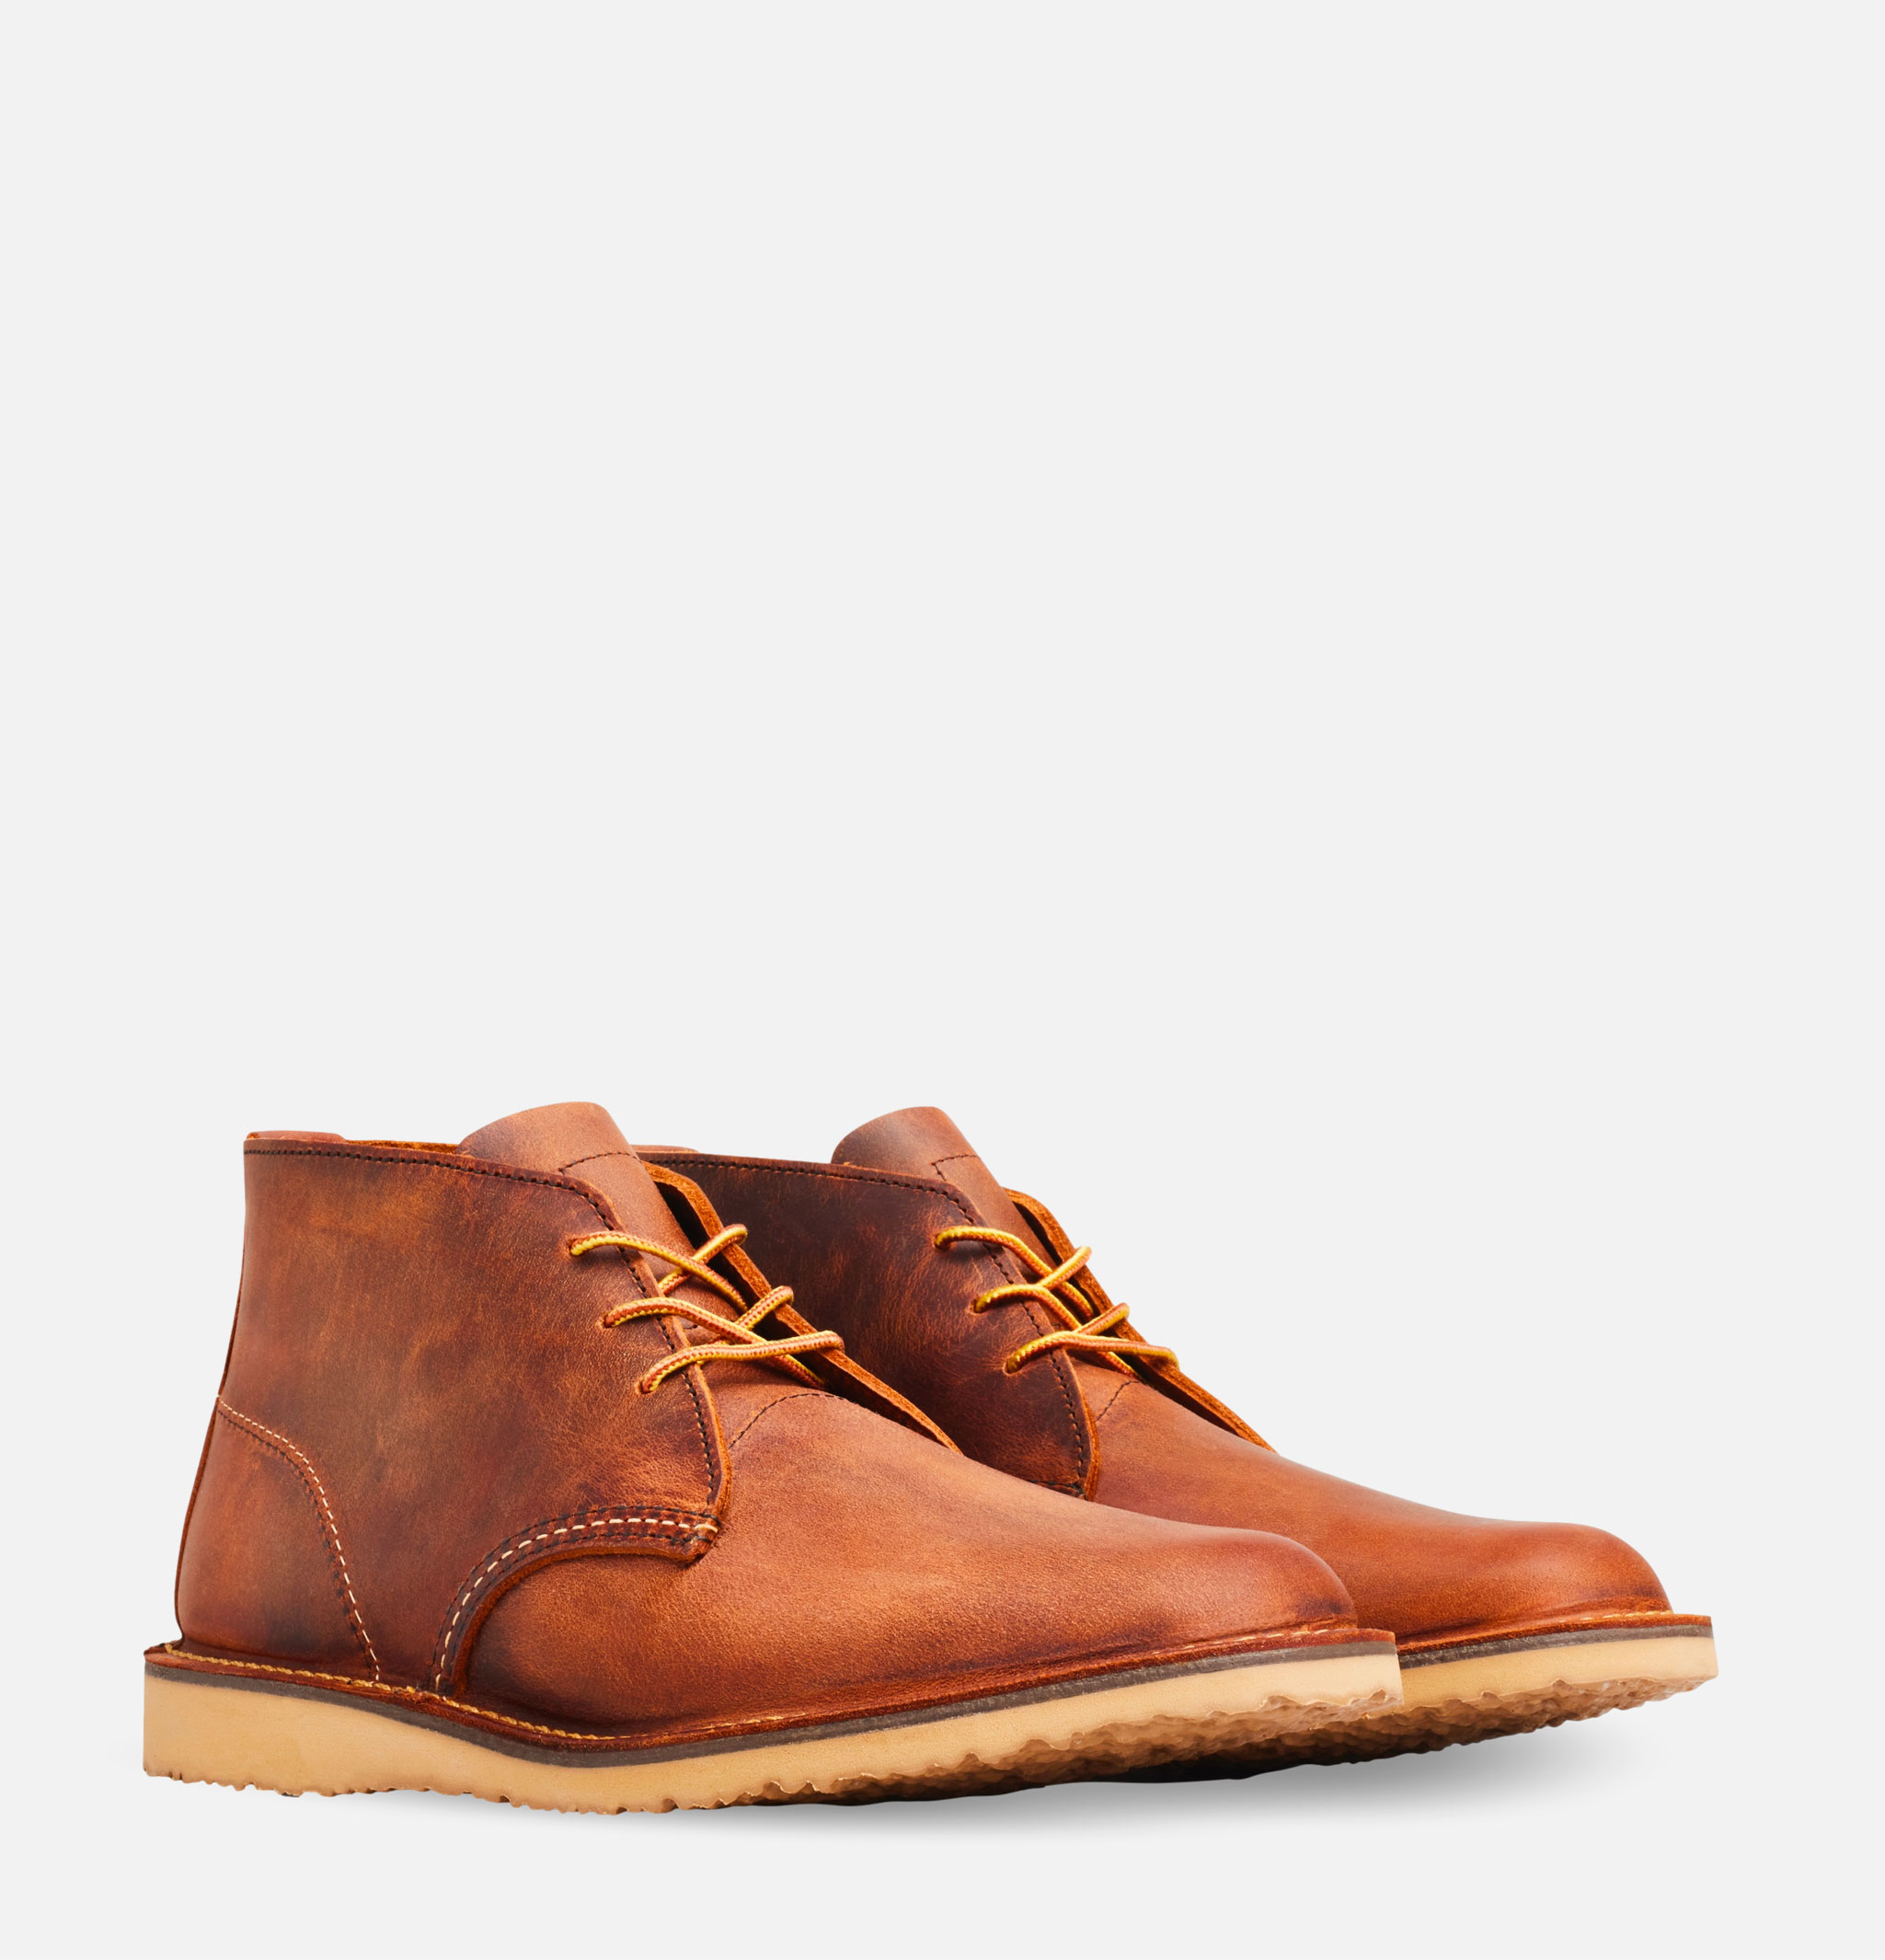 Red Wing Shoes - 3322 Weekender Chukka Copper Rough